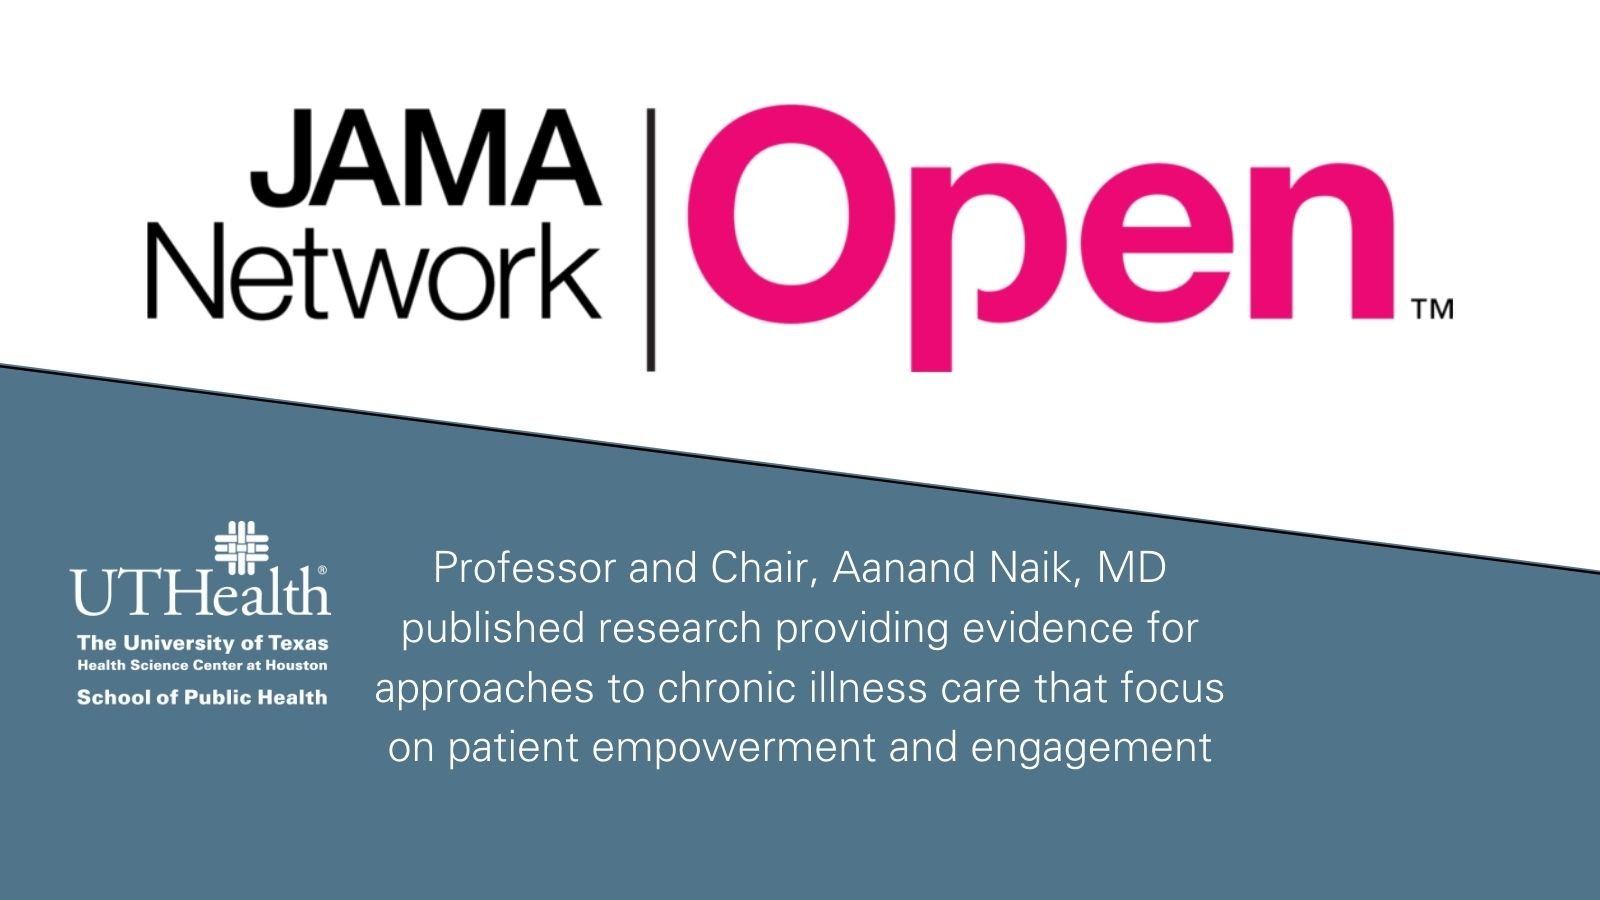 Naik leads as senior author for work published in JAMA Network Open on, 